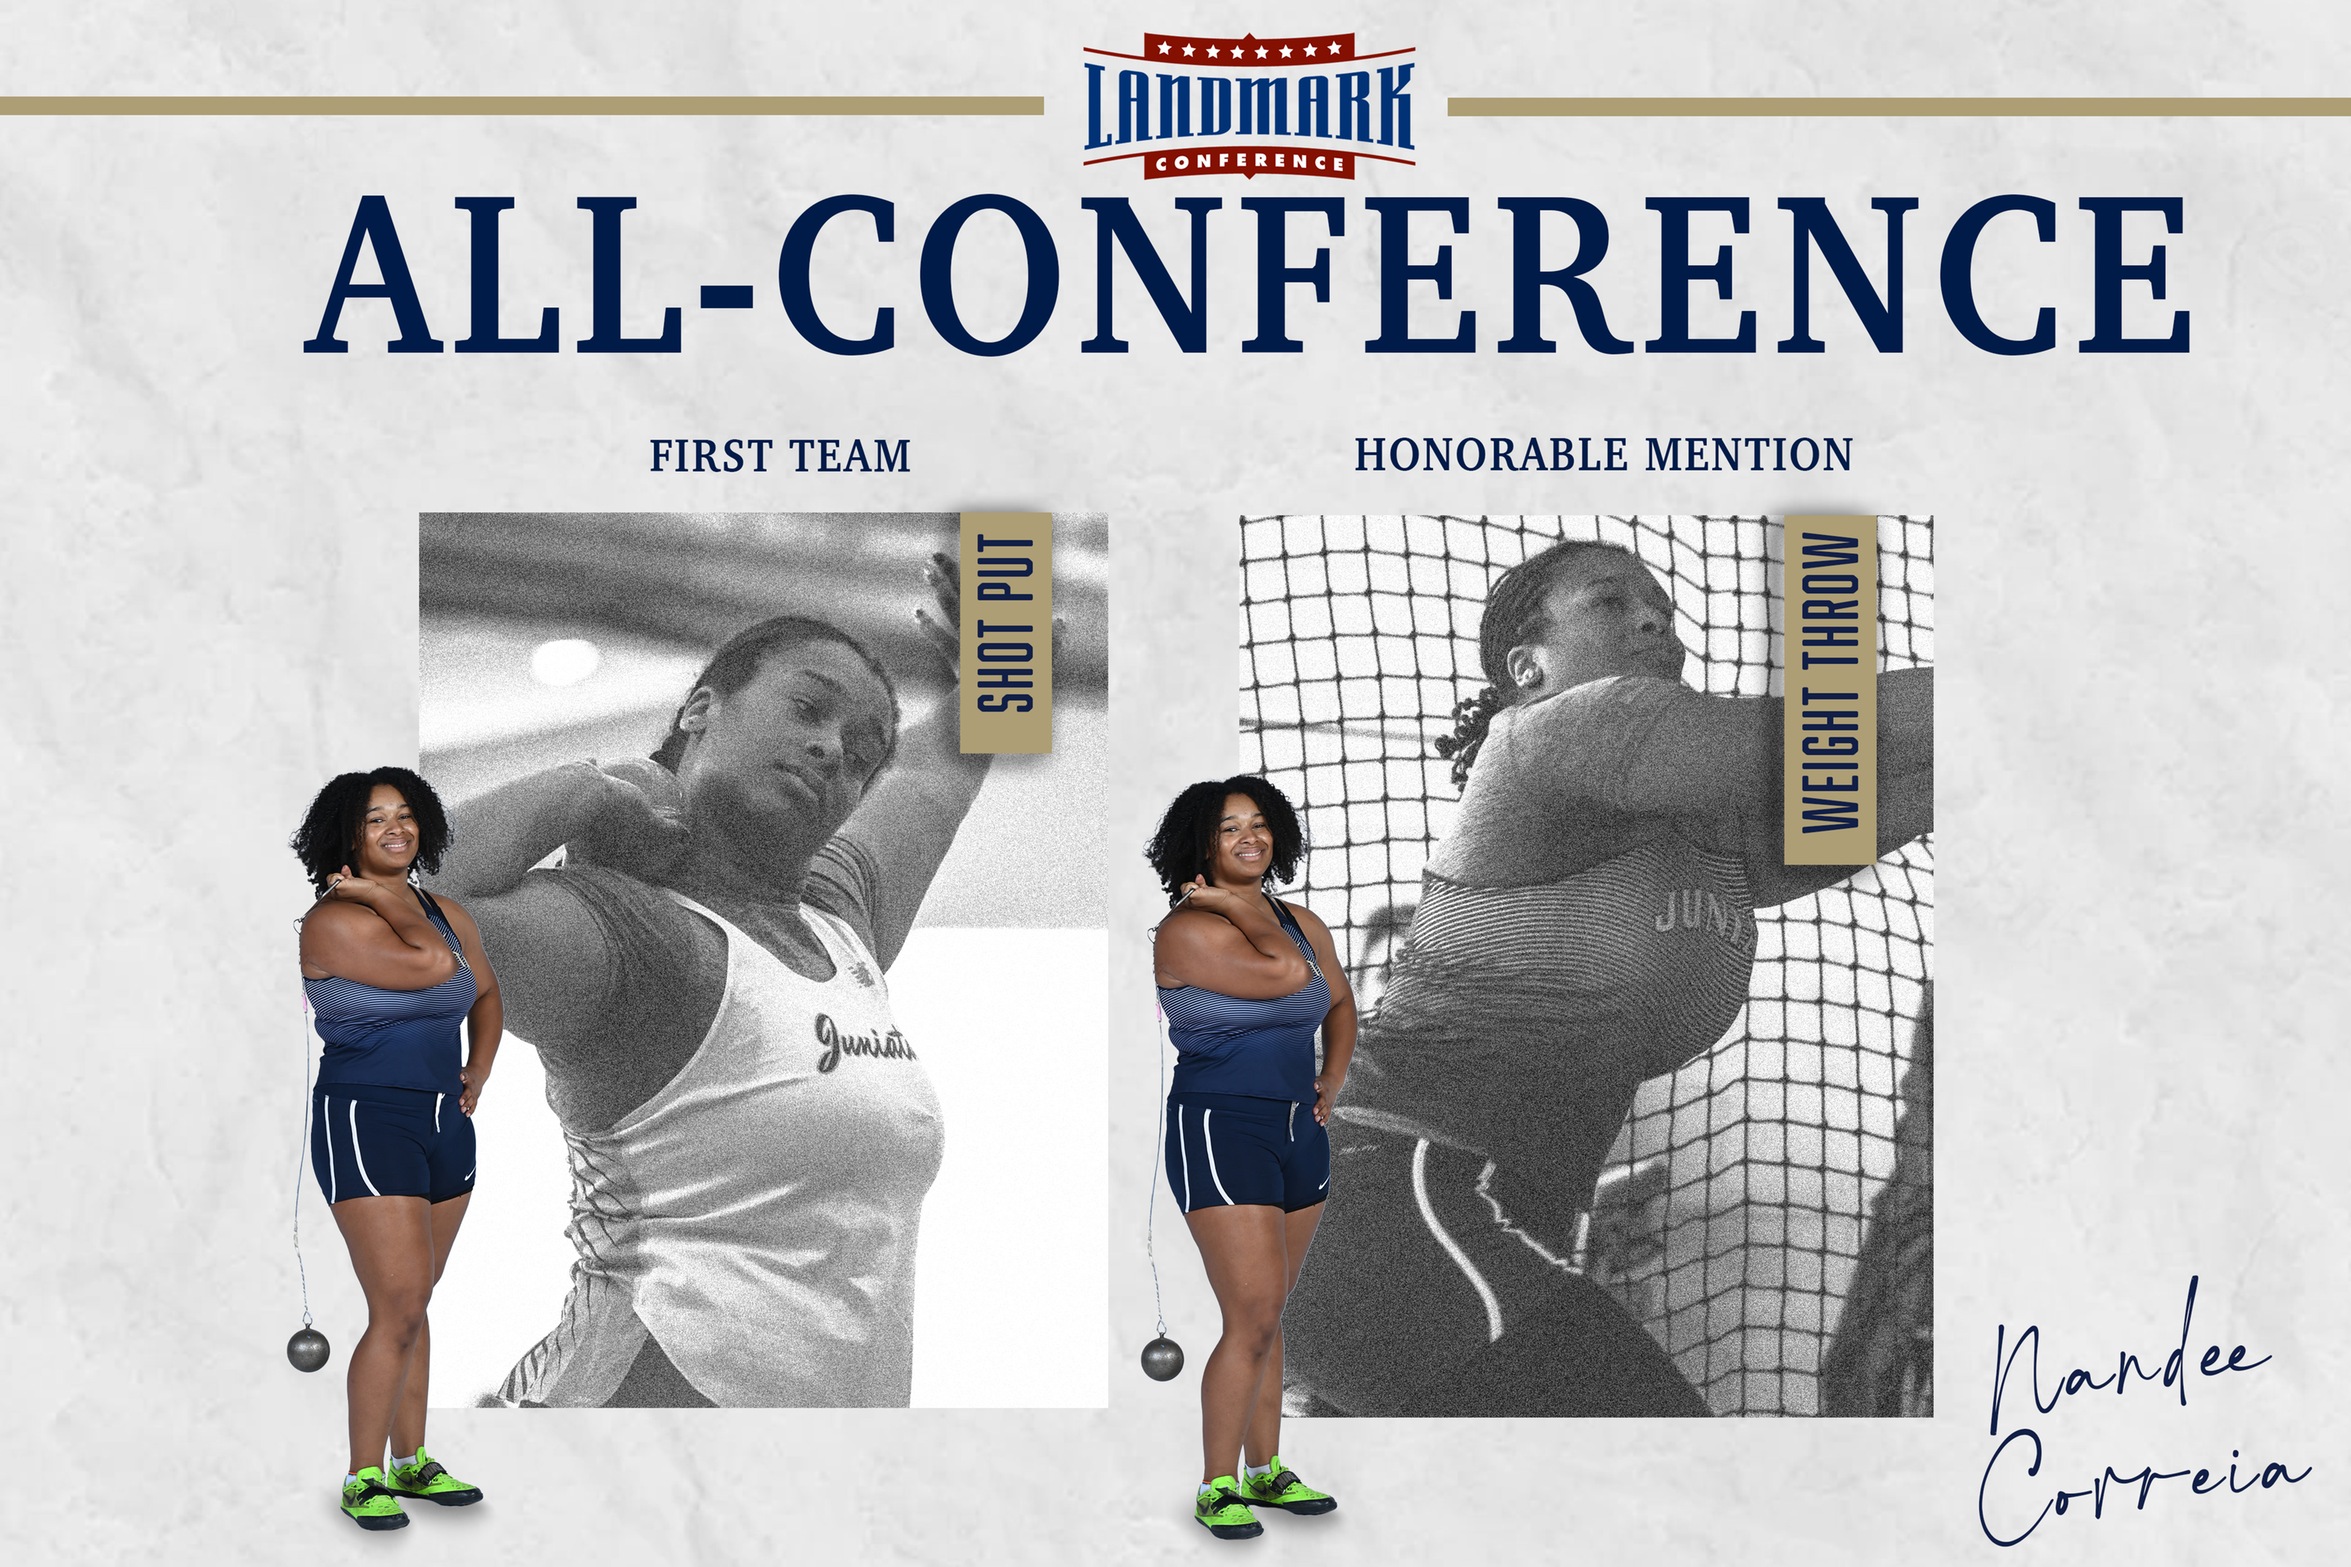 Correia Earns Two Landmark All-Conference Selections; First Team for Shot Put, Honorable Mention for Weight Throw